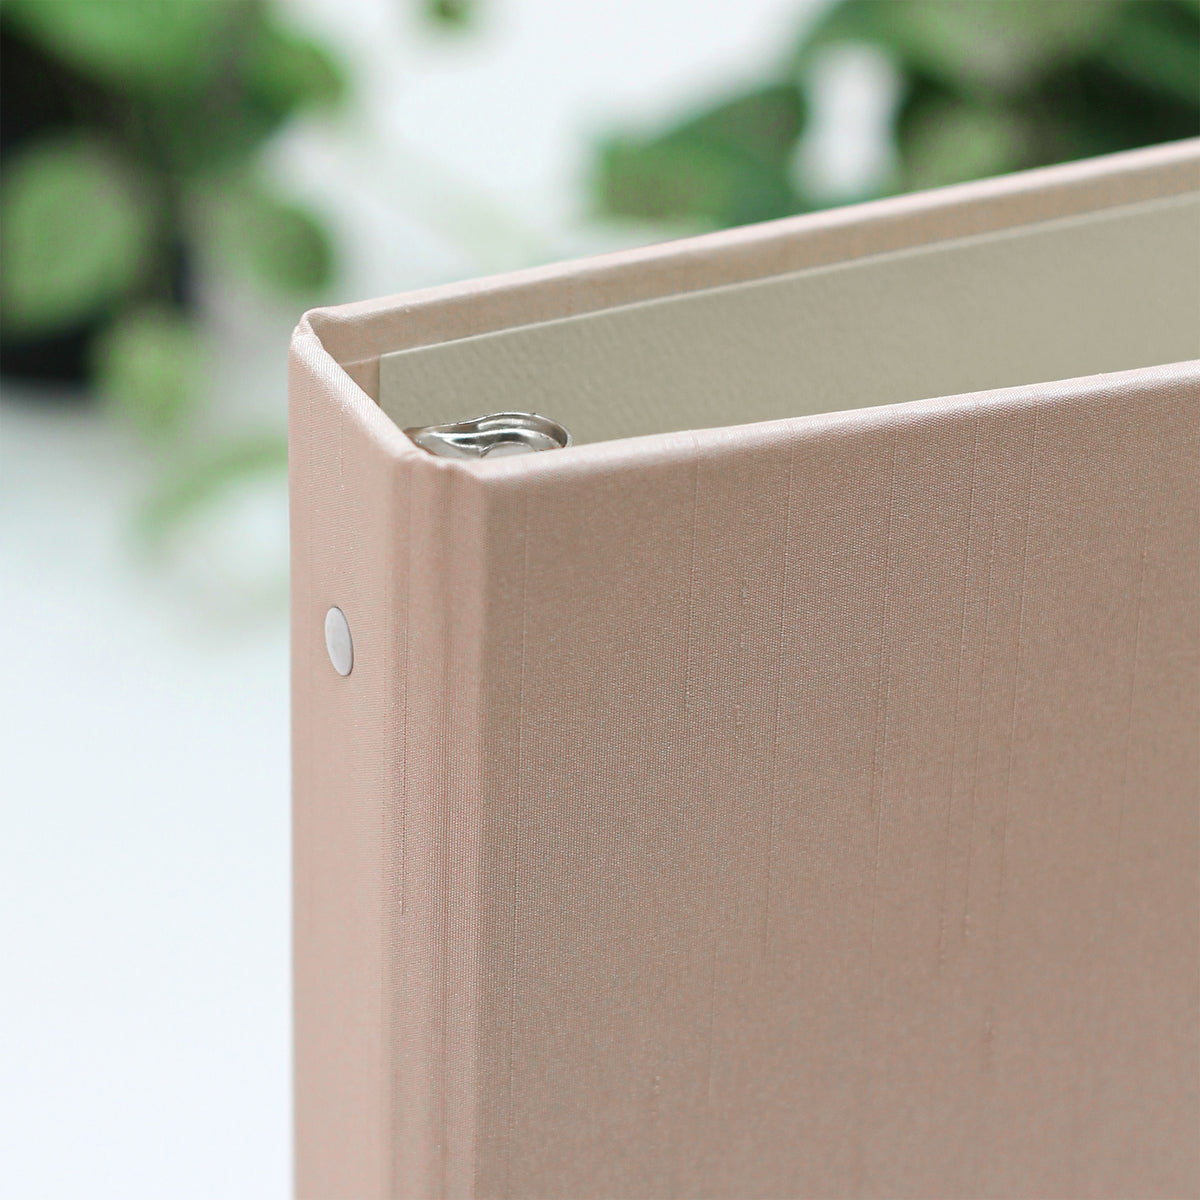 Medium Photo Binder For 4x6 Photos | Cover: Blush Pink Silk | Available Personalized